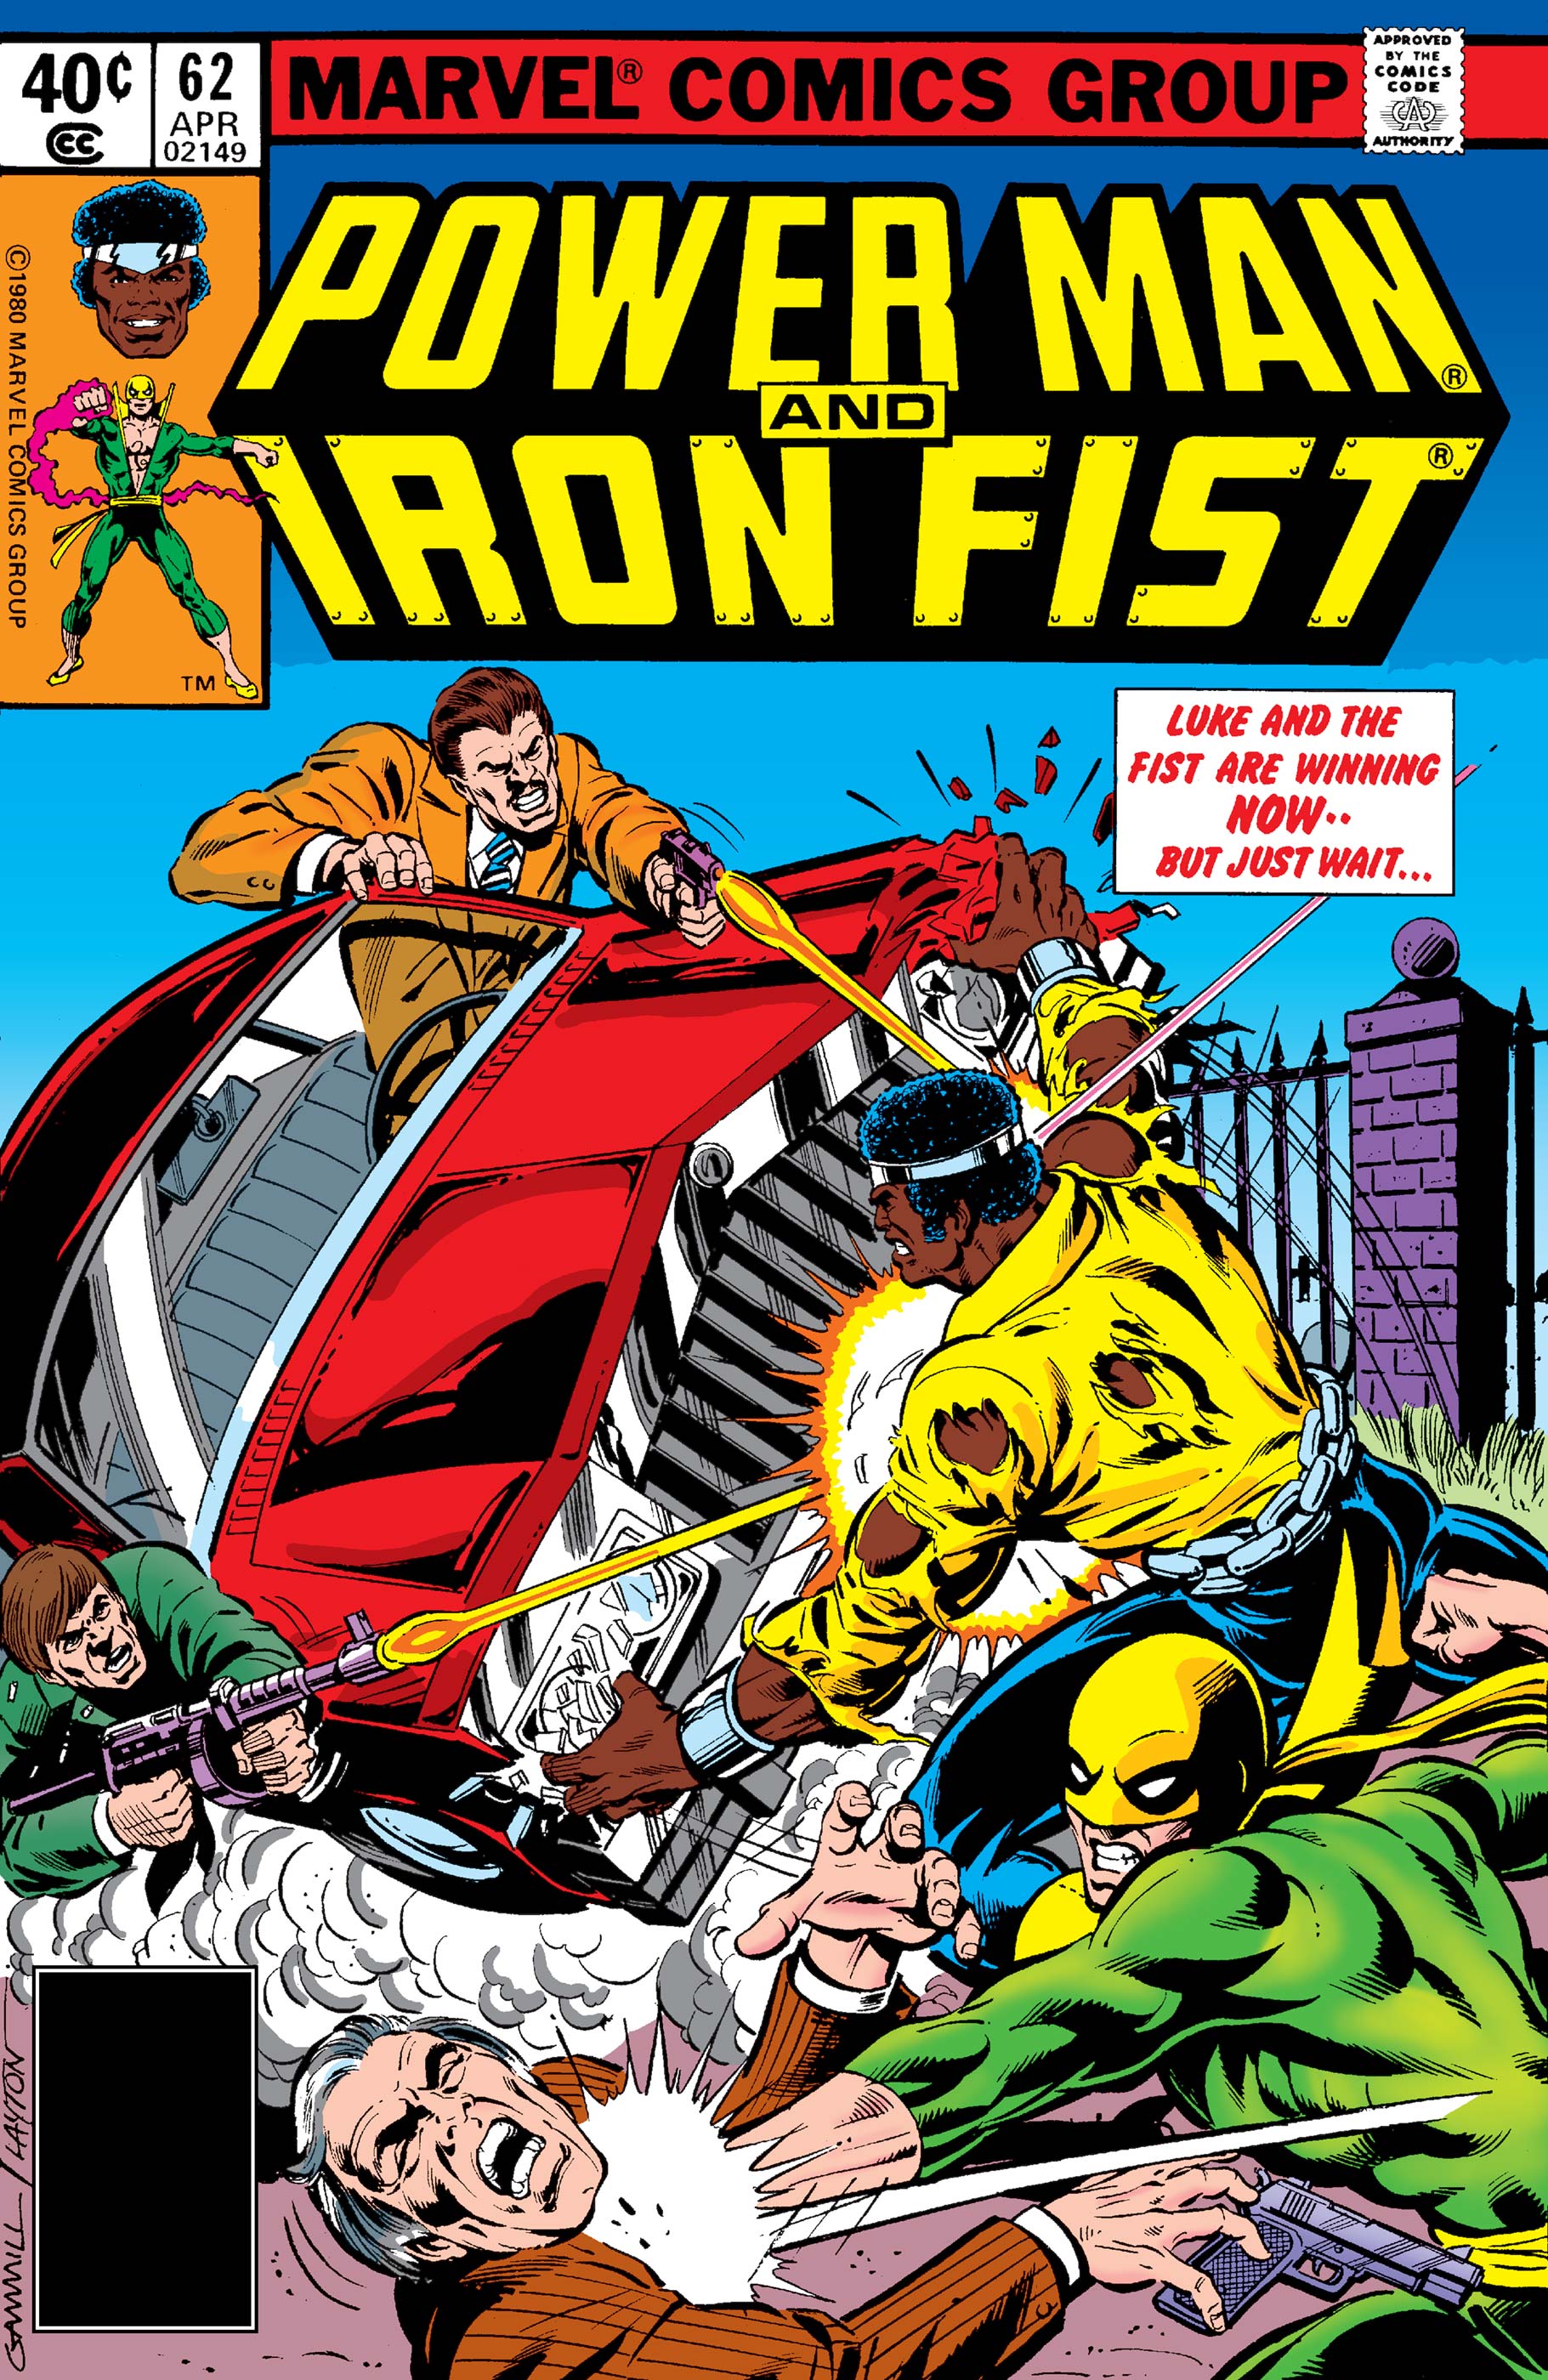 Power Man and Iron Fist (1978) #62